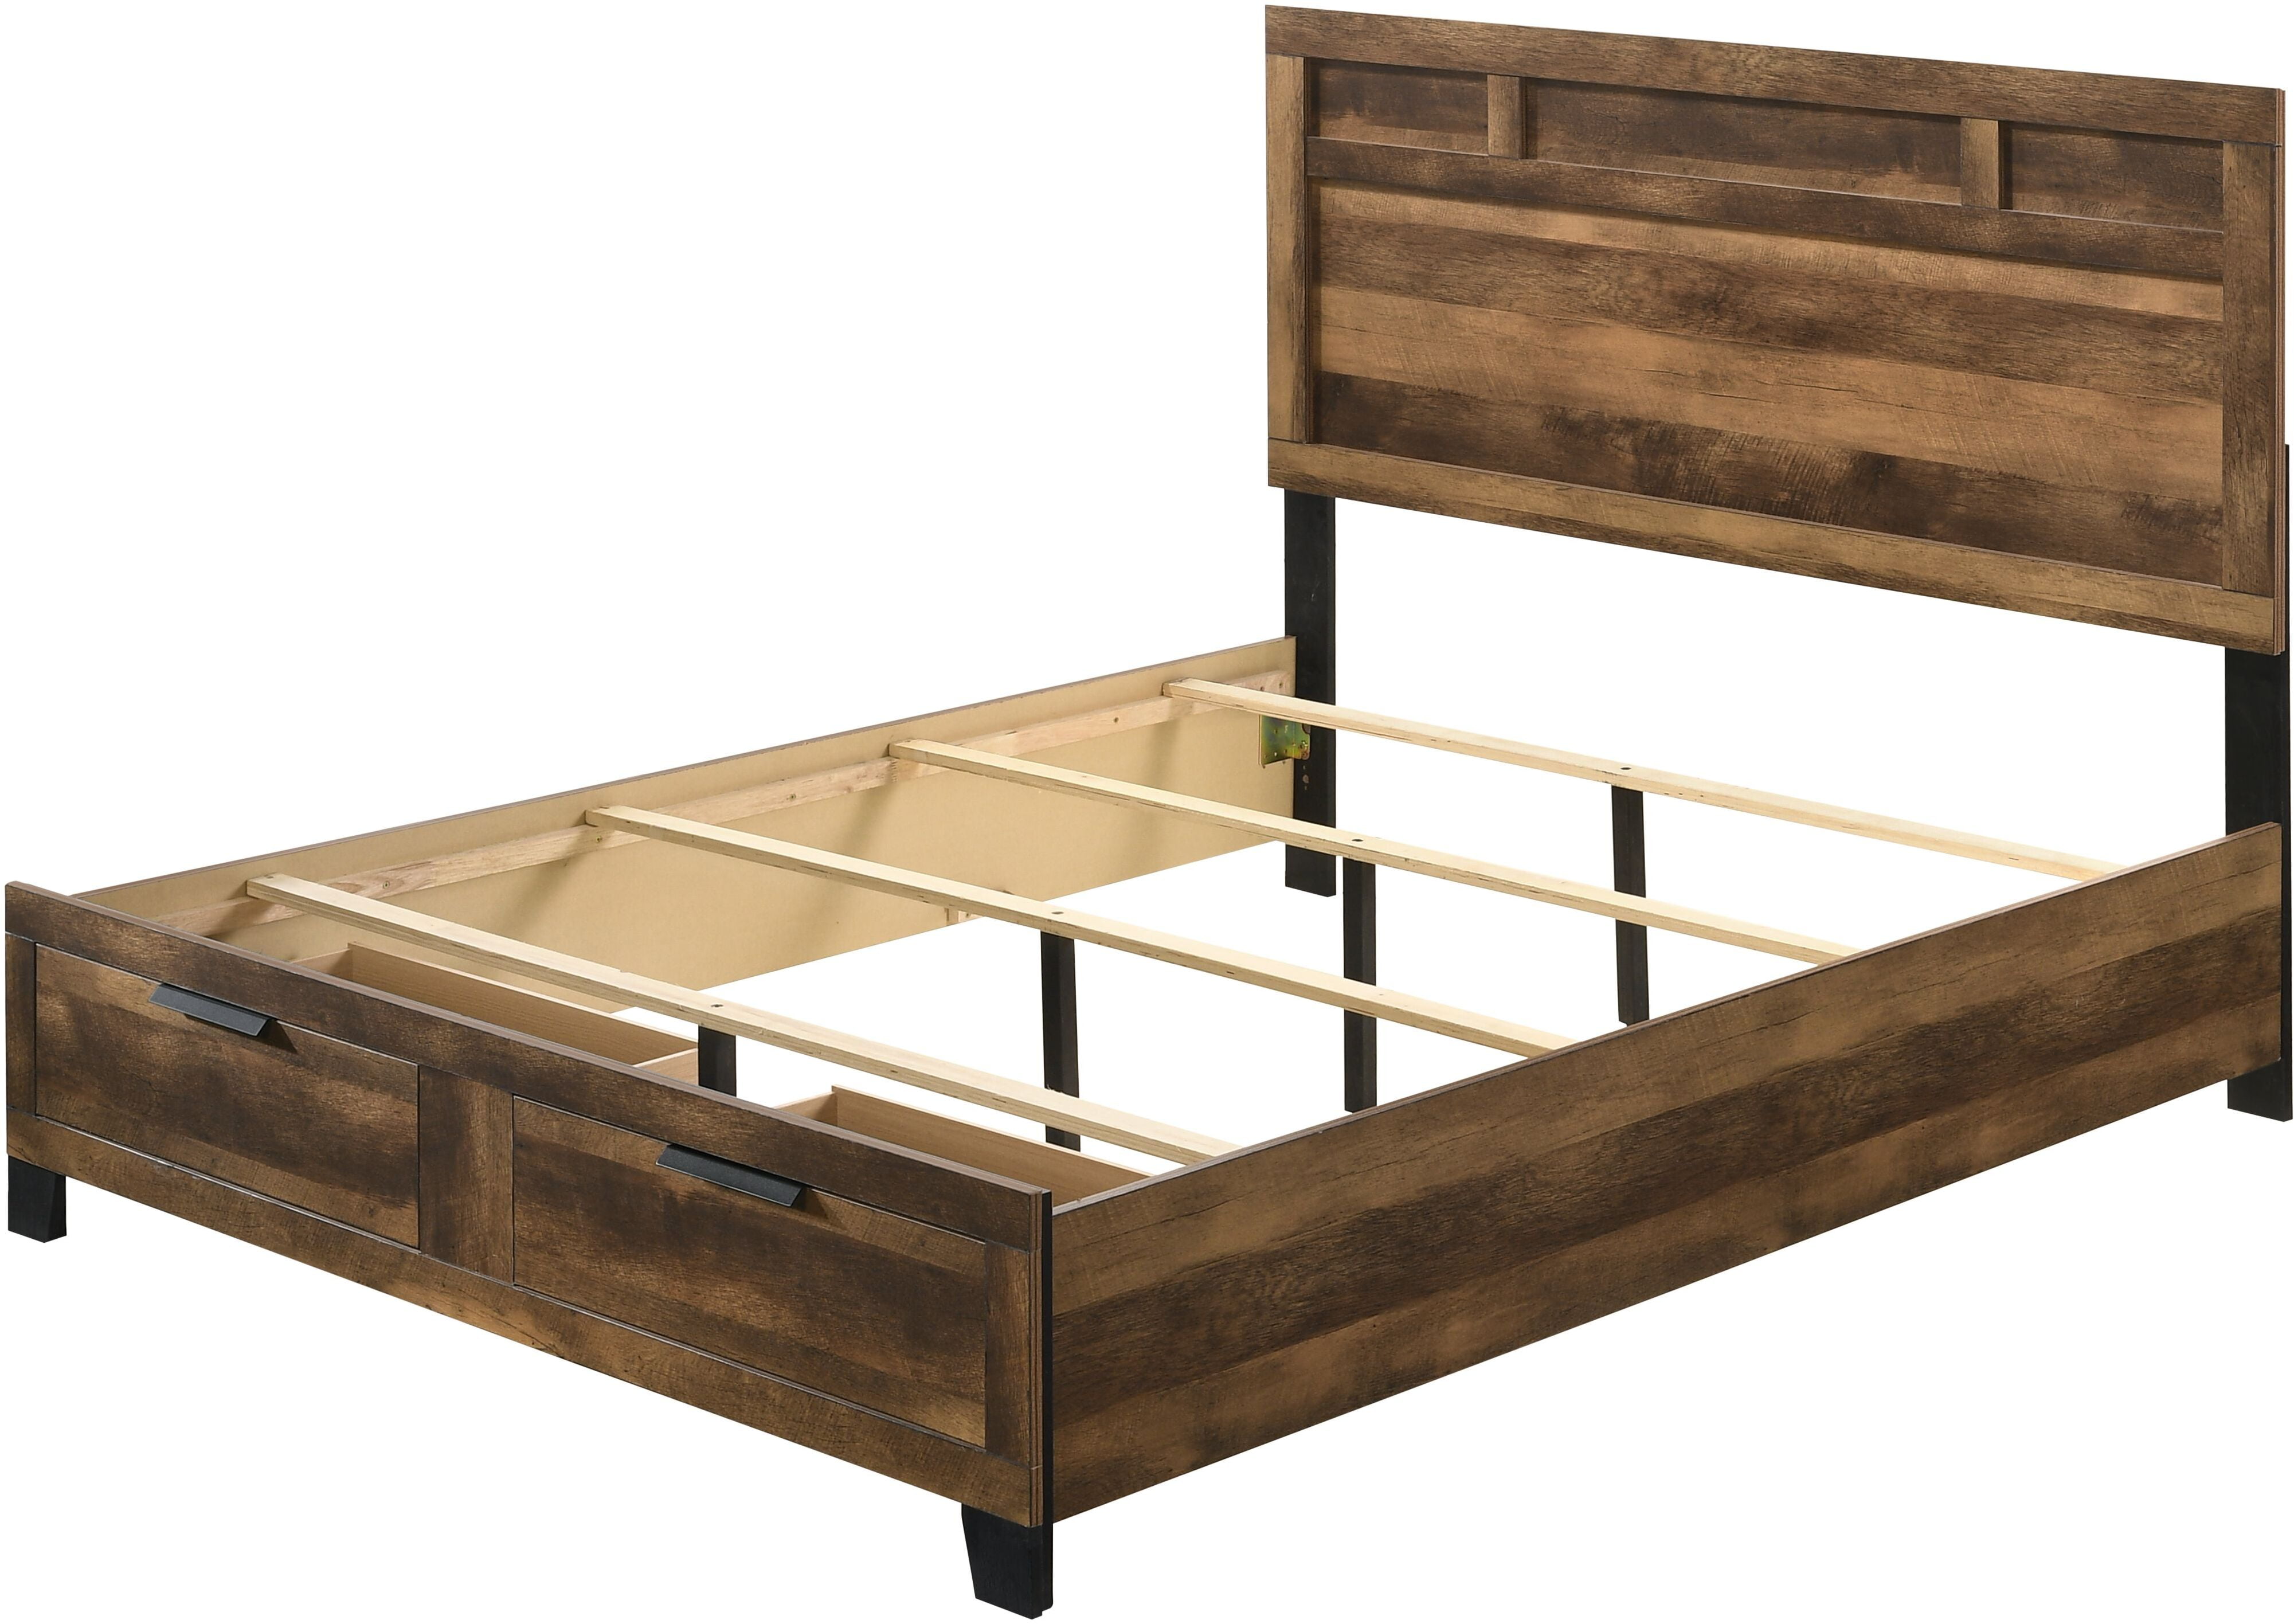 Mes Storage Queen Bed In Rustic Oak, How To Make Your Own Rustic Bed Frame With Storage